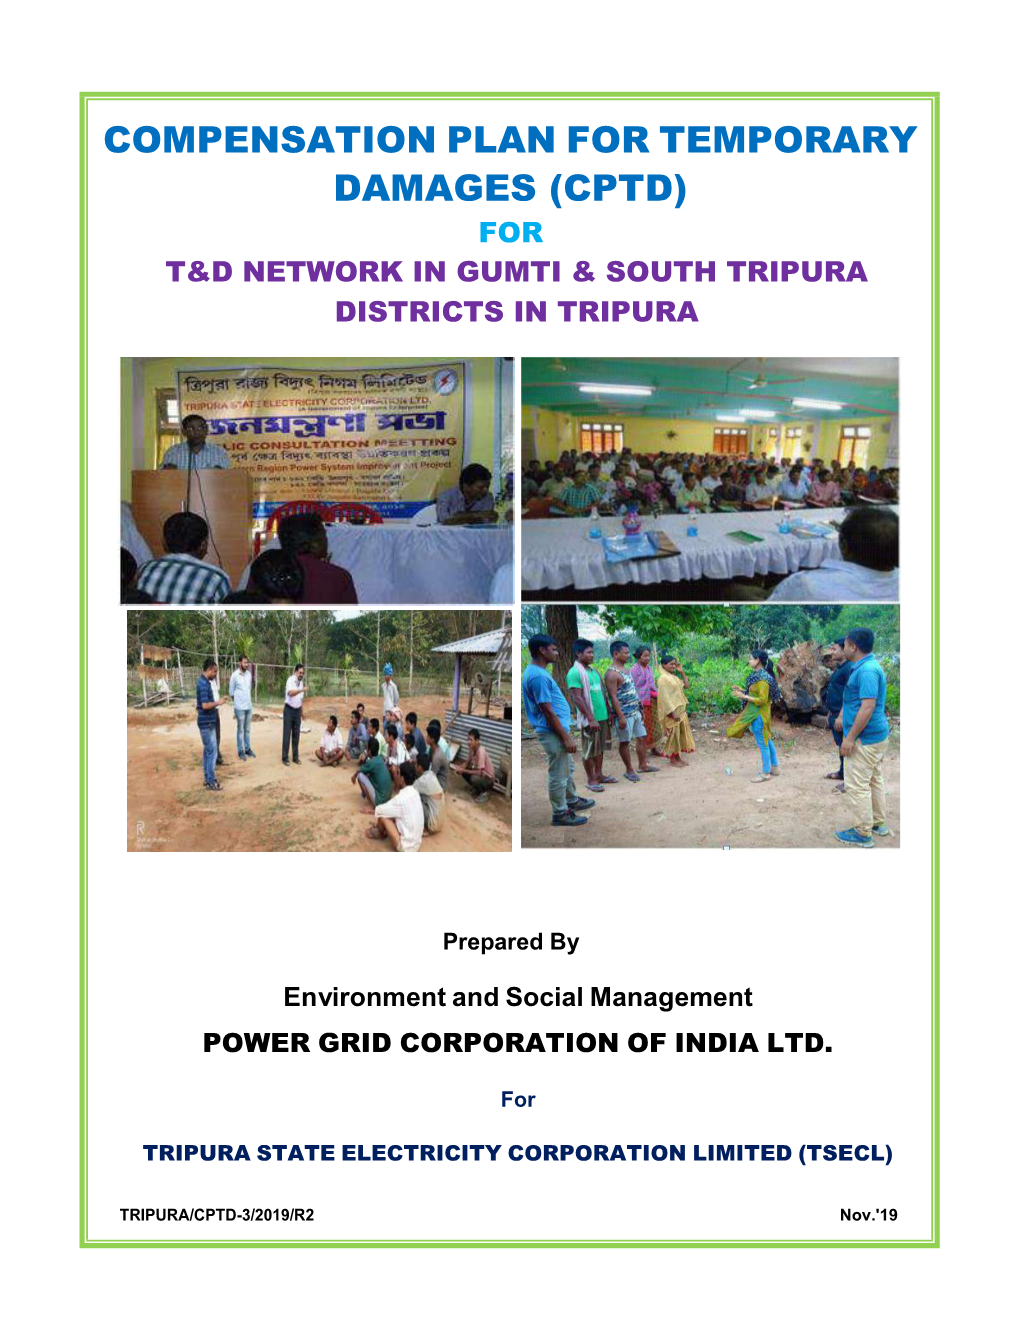 Compensation Plan for Temporary Damages (Cptd) for T&D Network in Gumti & South Tripura Districts in Tripura